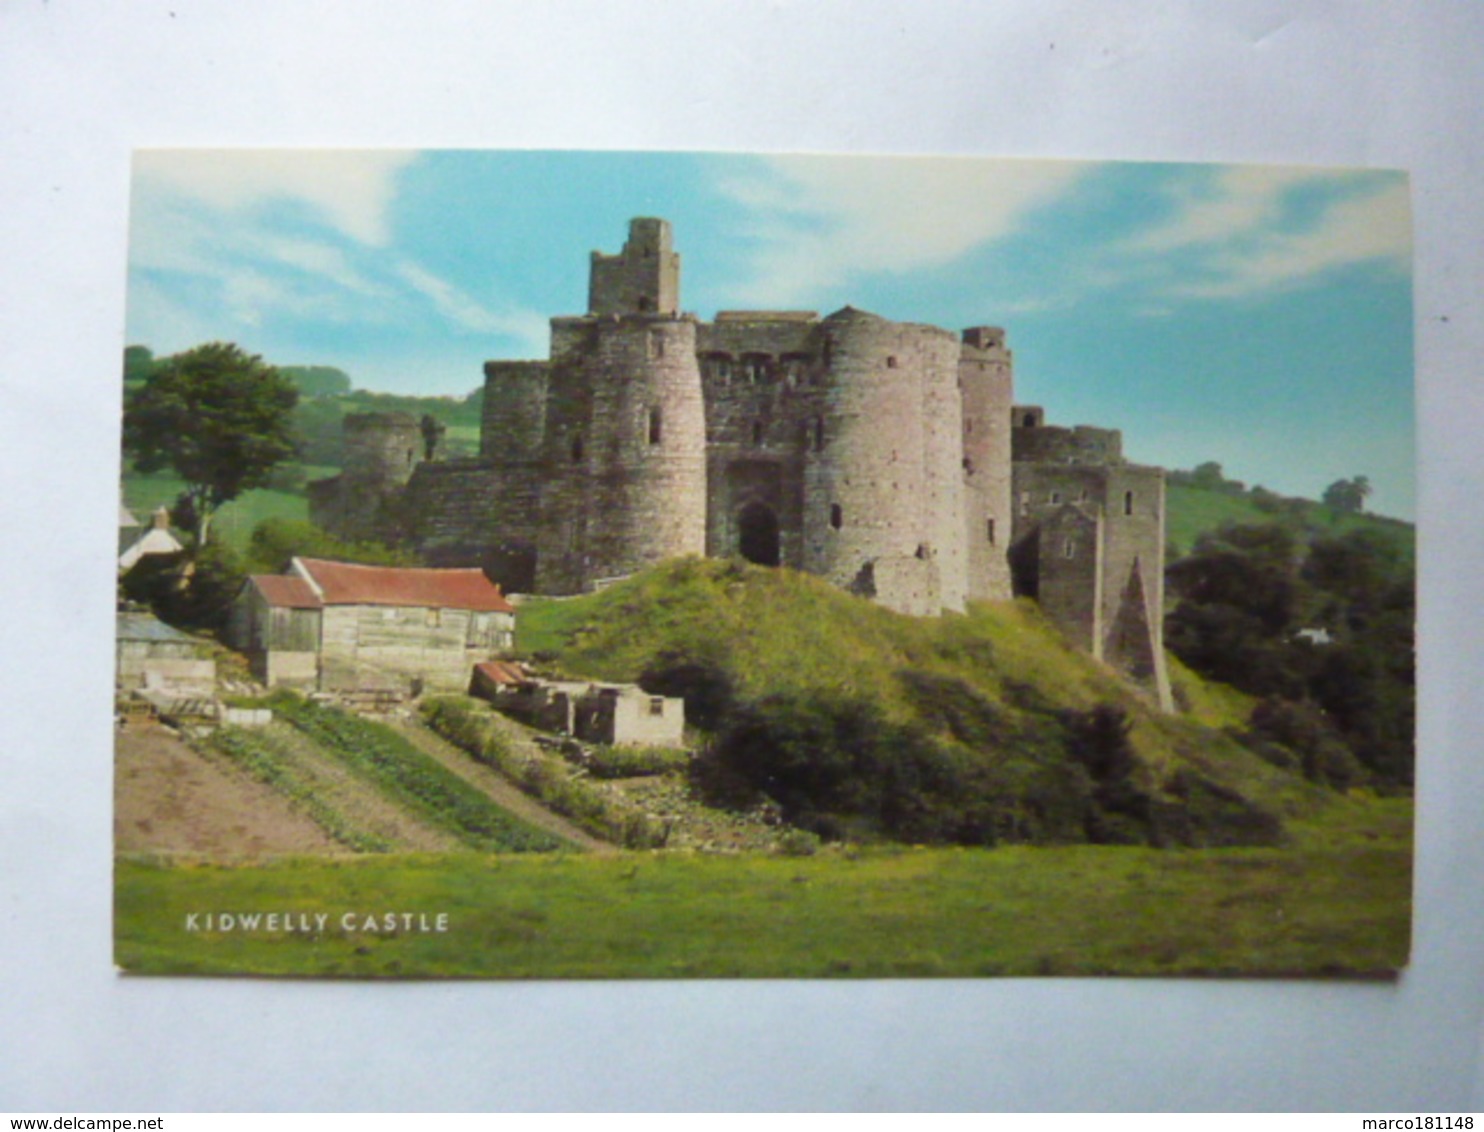 KIDWELLY CASTLE - Carmarthenshire